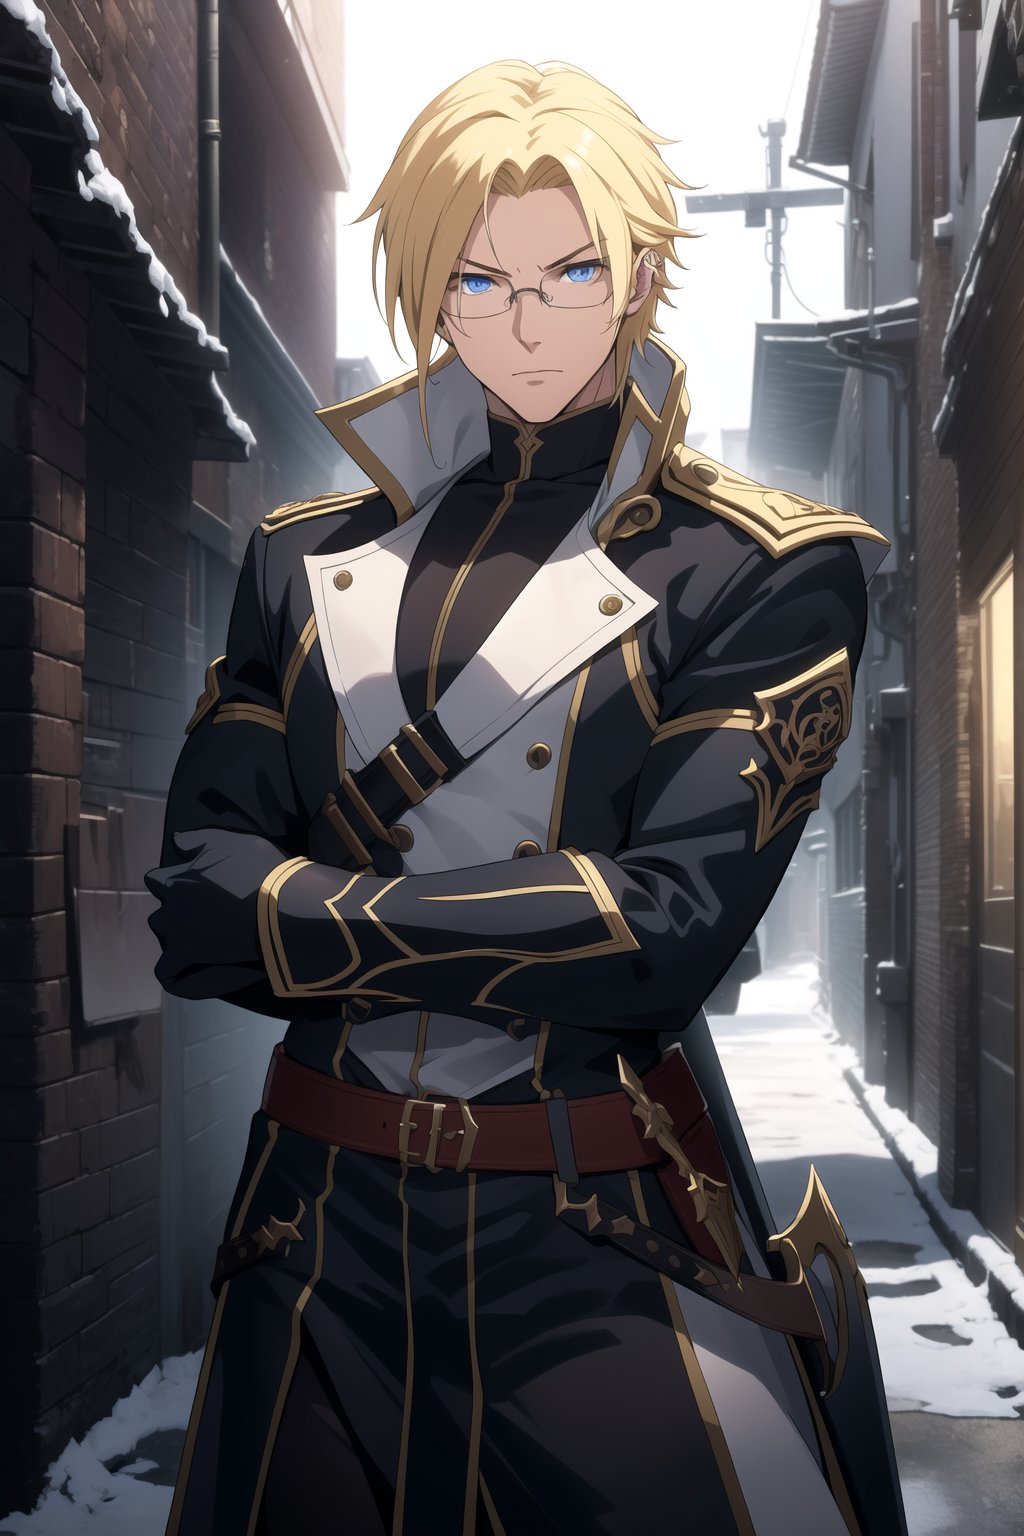 (Masterpiece, Best Quality), (A Youthful 23-Year-Old European Male Demon Slayer), (Messy Blonde Hair), (Piercing Blue Eyes with Glasses), (Fair Skin), (Clad in White Tactical Modern Demon Hunter Attire), (Urban Alley at Night:1.4), (Dynamic Pose:1.2), Centered, (Half Body Shot:1.4), (From Front Shot:1.4), Insane Details, Intricate Face Detail, Intricate Hand Details, Cinematic Shot and Lighting, Realistic and Vibrant Colors, Sharp Focus, Ultra Detailed, Realistic Images, Depth of Field, Incredibly Realistic Environment and Scene, Master Composition and Cinematography,castlevania style